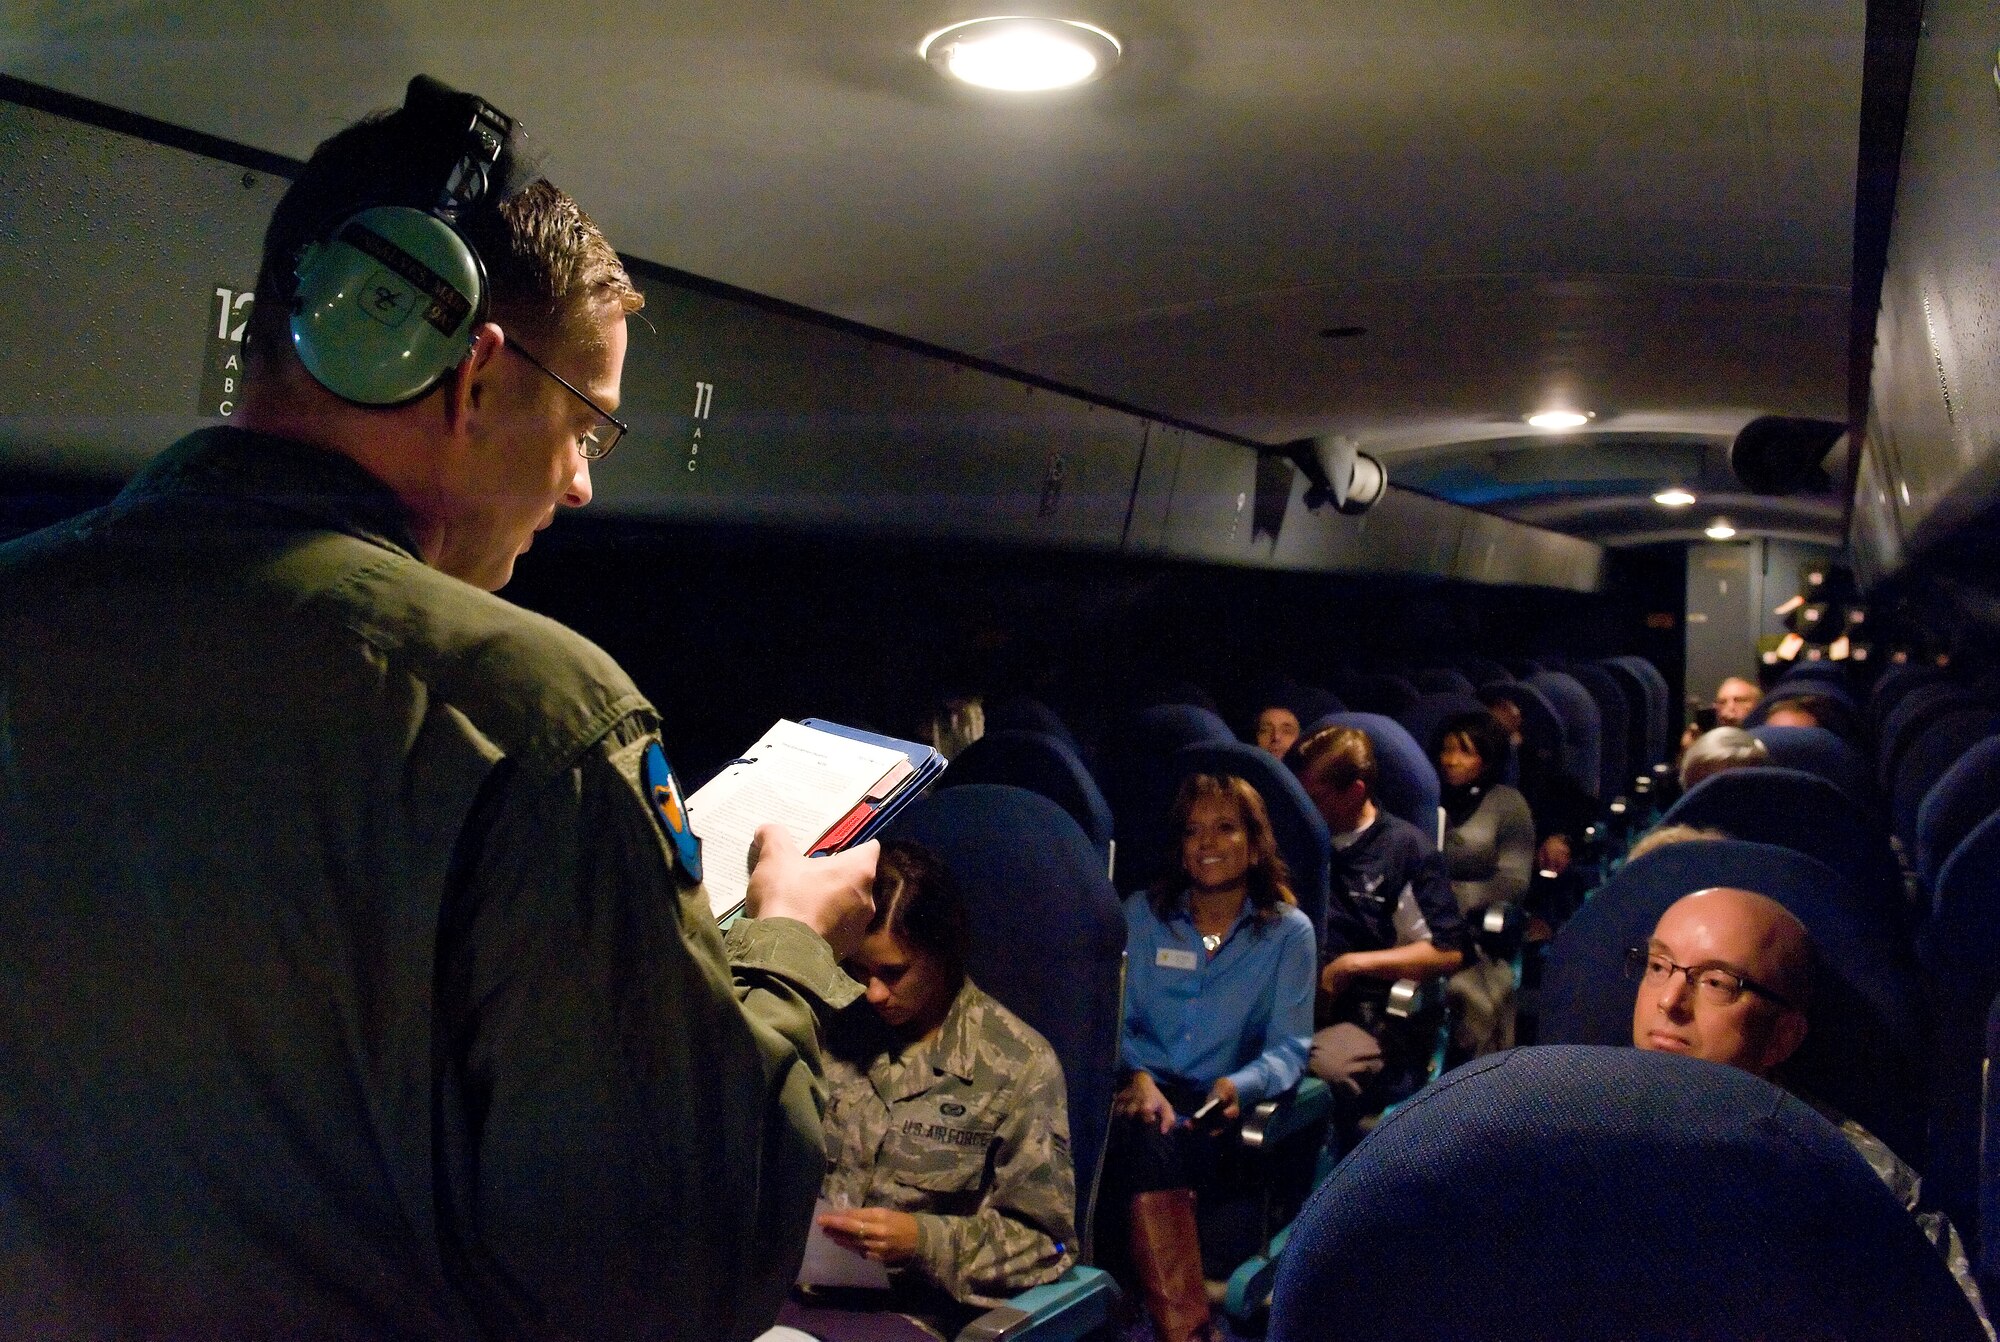 Master Sgt. Marc Gonsalves, 9th Airlift Squadron loadmaster, gives a safety briefing to Team Dover honorary commanders, unit commanders and public affairs ambassadors sitting in the troop compartment of a C-5M Super Galaxy prior to takeoff Oct. 29, 2014, at Dover Air Force Base, Del. Gonsalves briefed personnel on oxygen mask use, inflatable life vest donning and emergency exit locations within the troop compartment. (U.S. Air Force photo/Roland Balik)